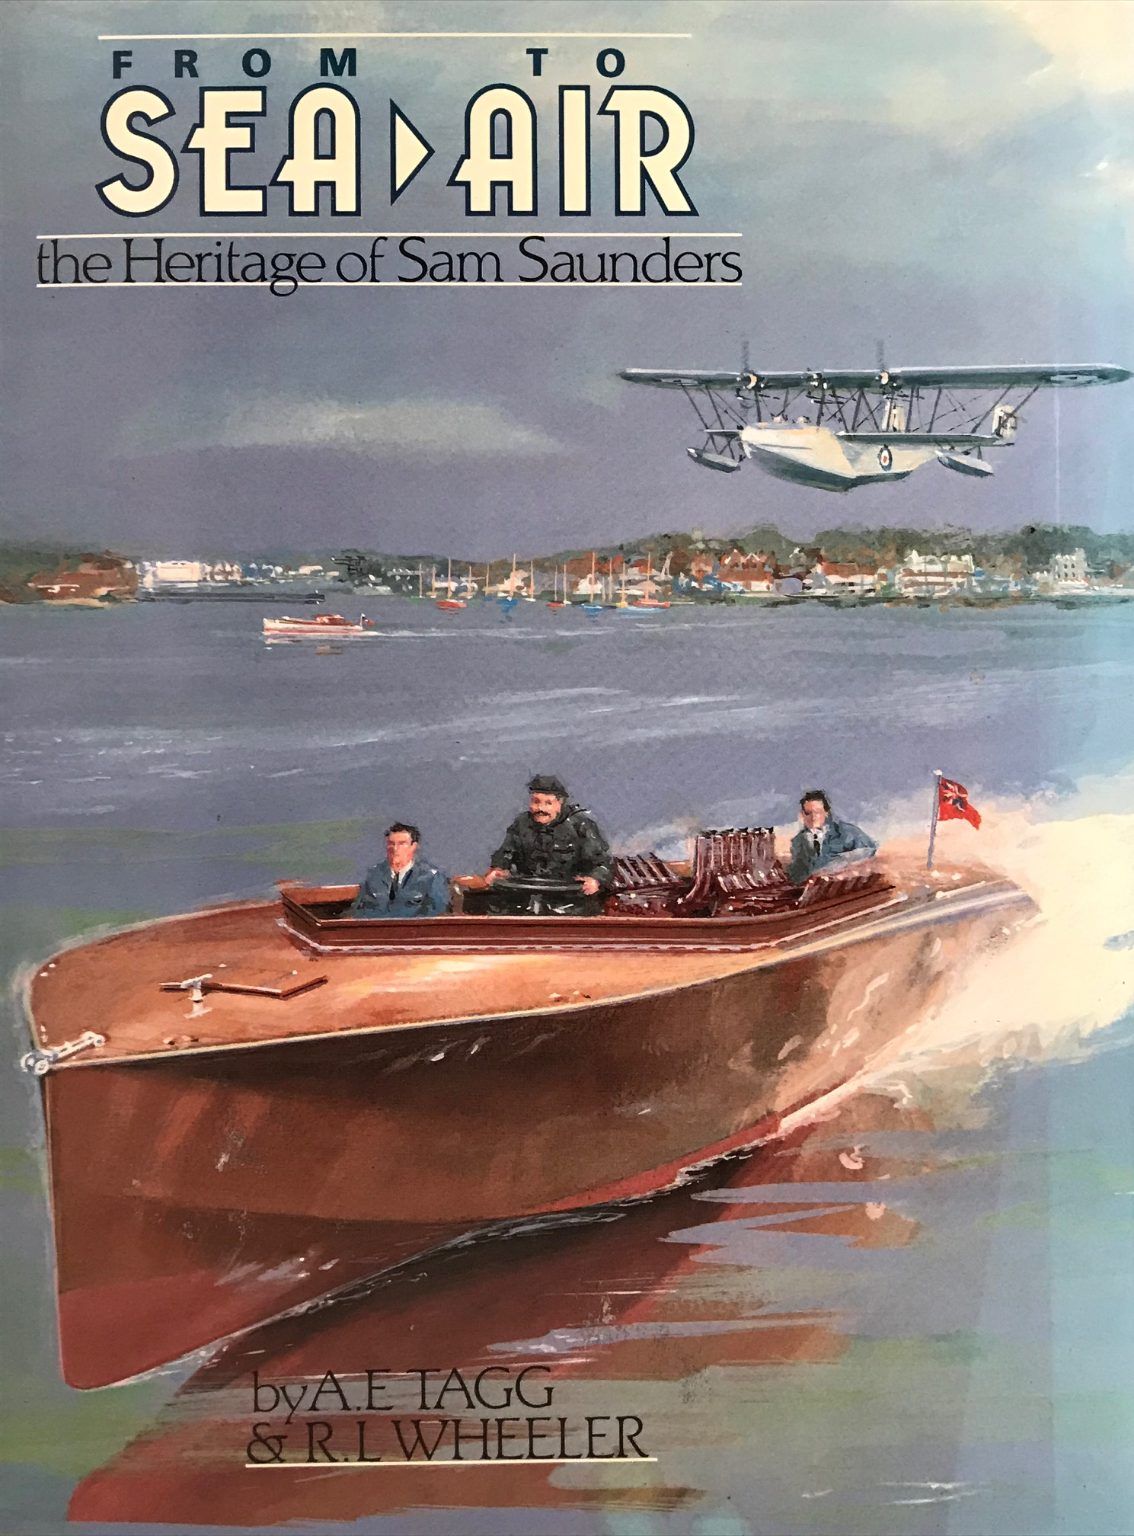 FROM SEA TO AIR: The Heritage of Sam Saunders